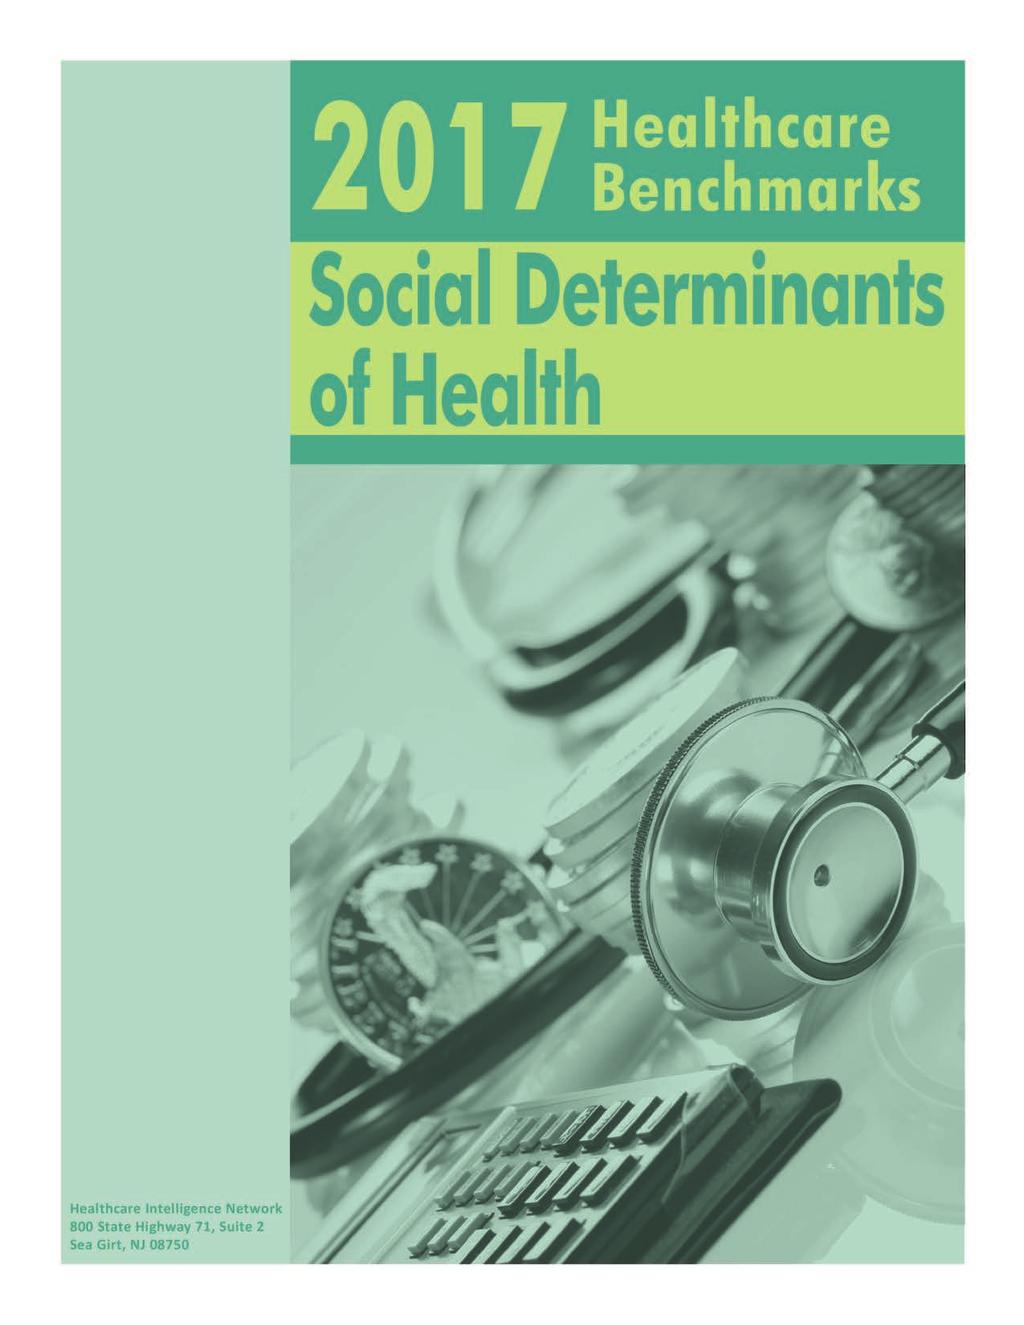 Note: This is an authorized excerpt from 2017 Healthcare Benchmarks: Social Determinants of Health.